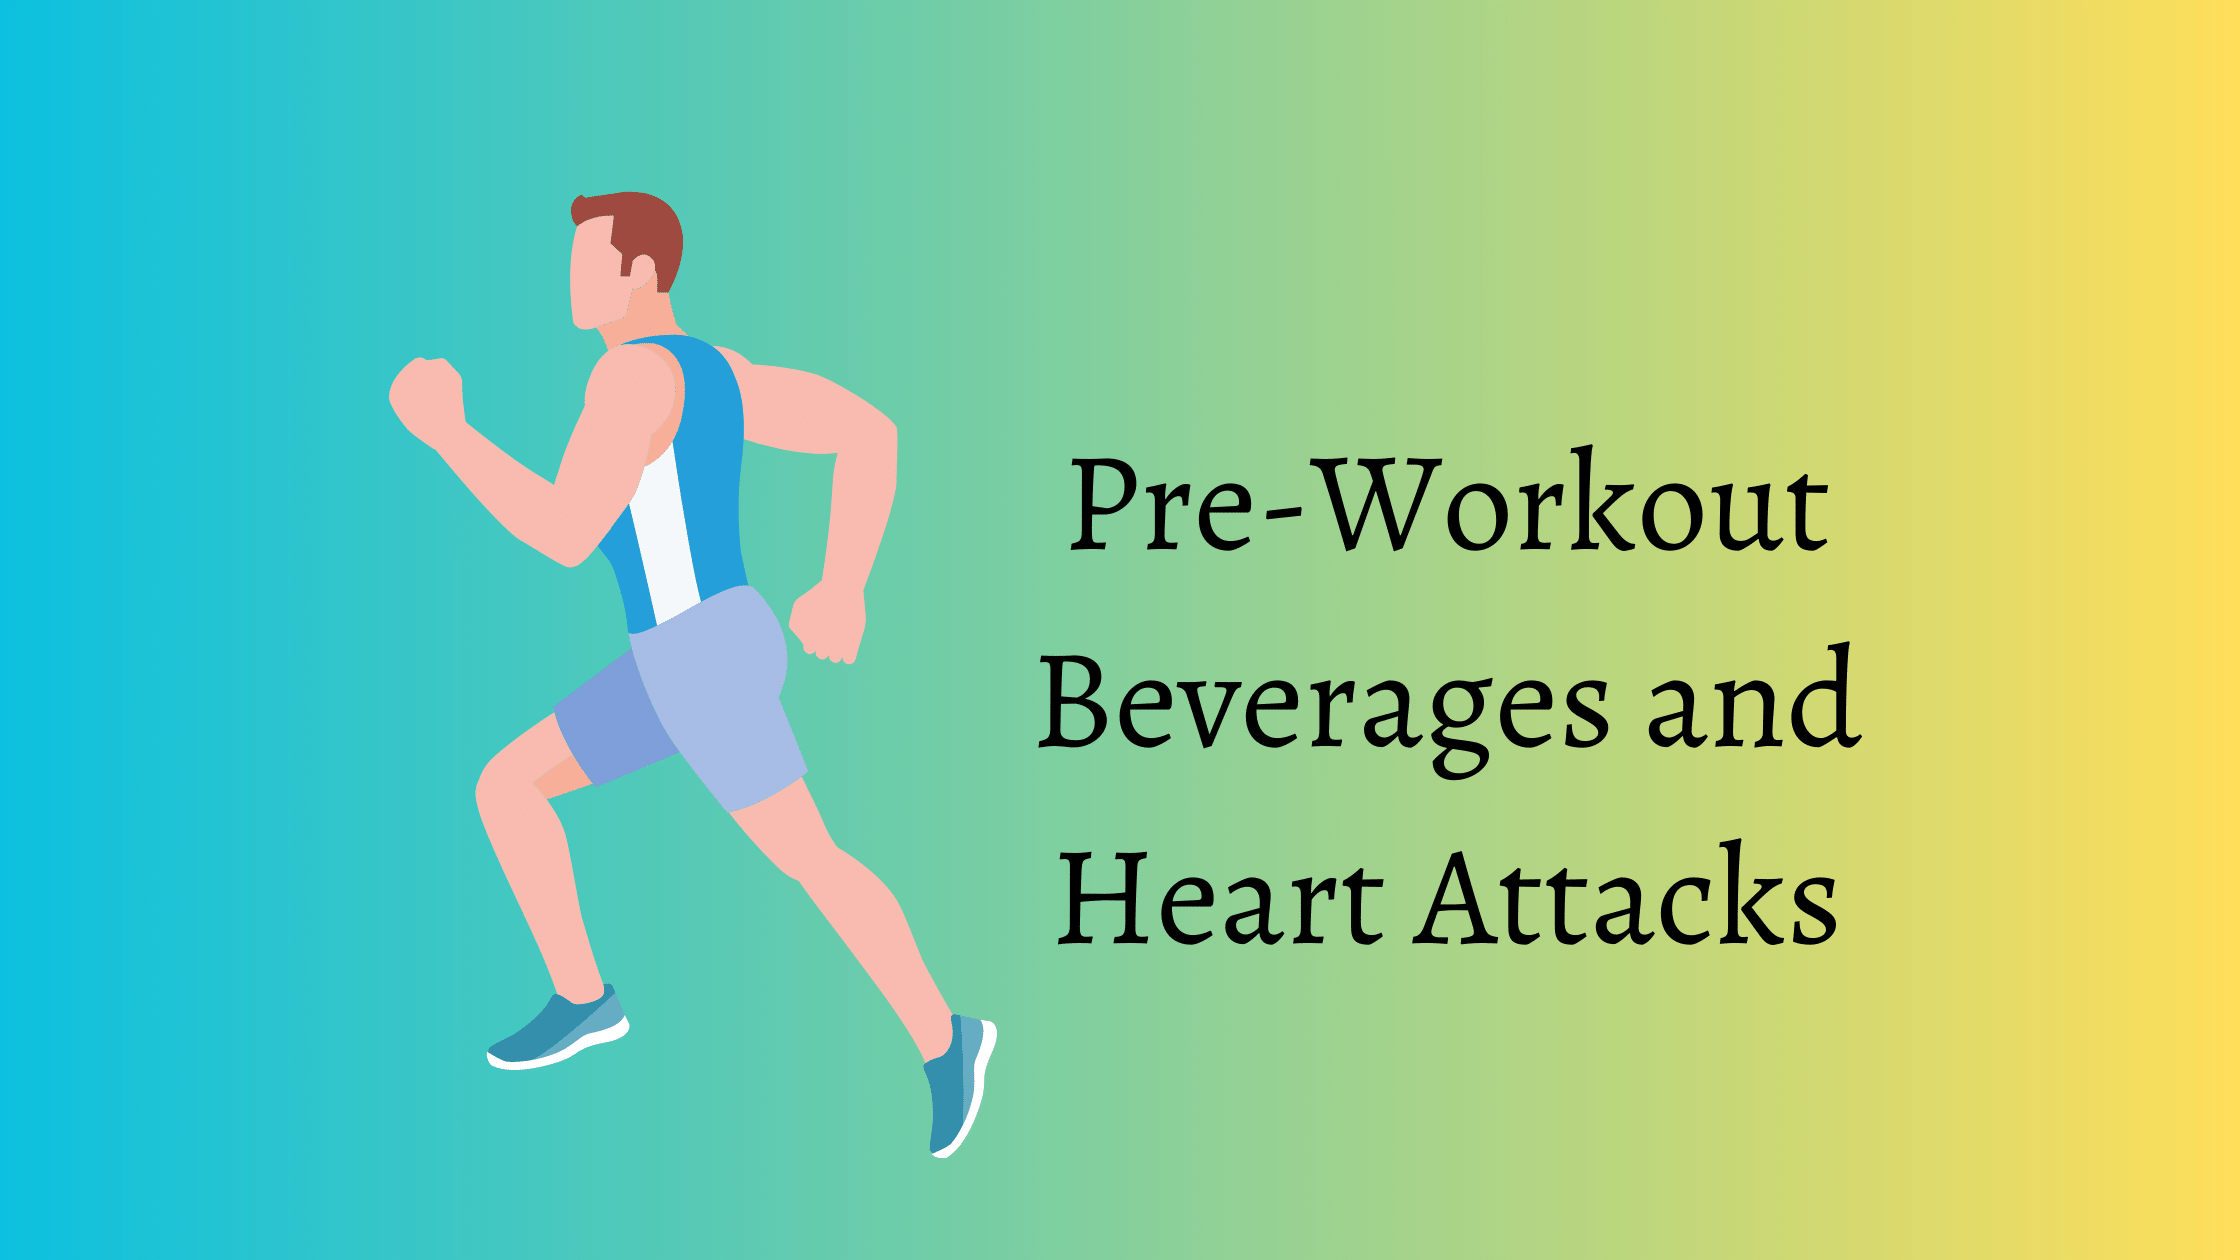 Pre-Workout Beverages and Heart Attacks